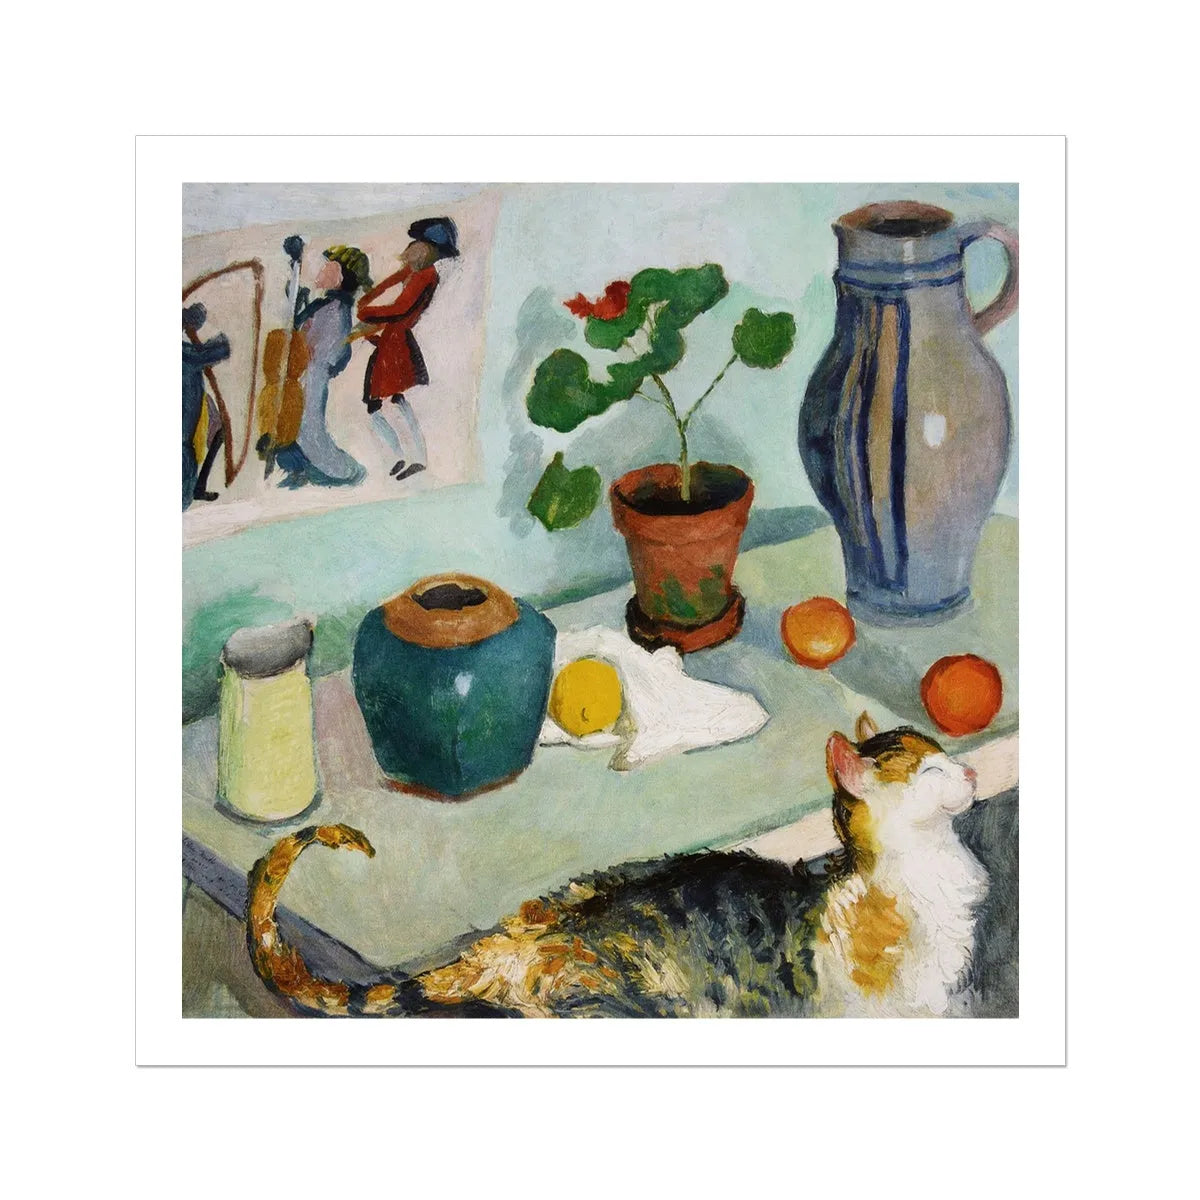 Ghost In The House Stalls - Still Life With a Cat By August Macke Fine Art Print - 30’x30’ - Posters Prints &